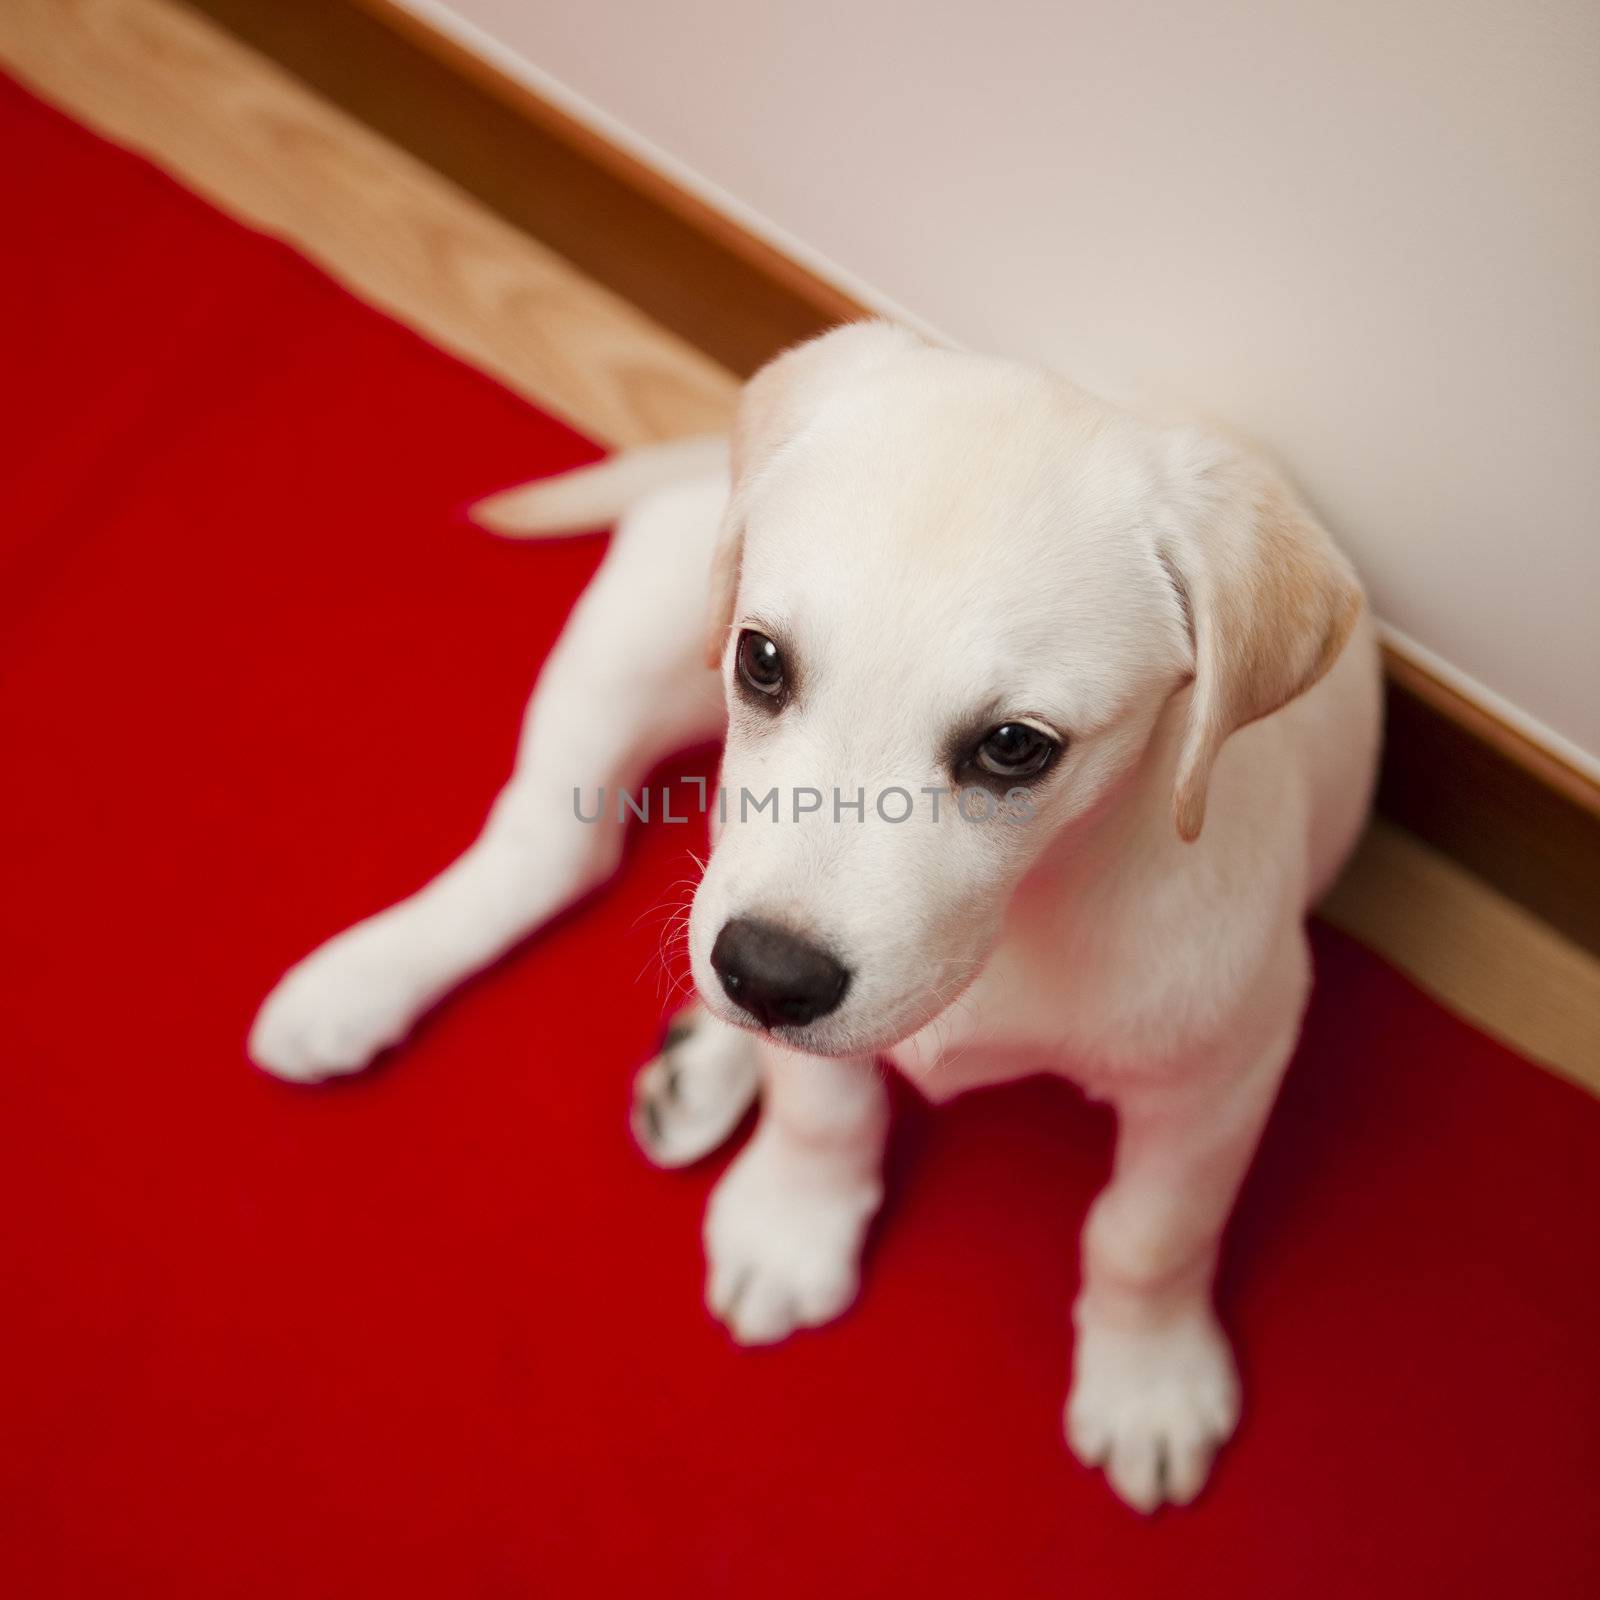 Top view of a labrador retriever puppy sitting on the floor